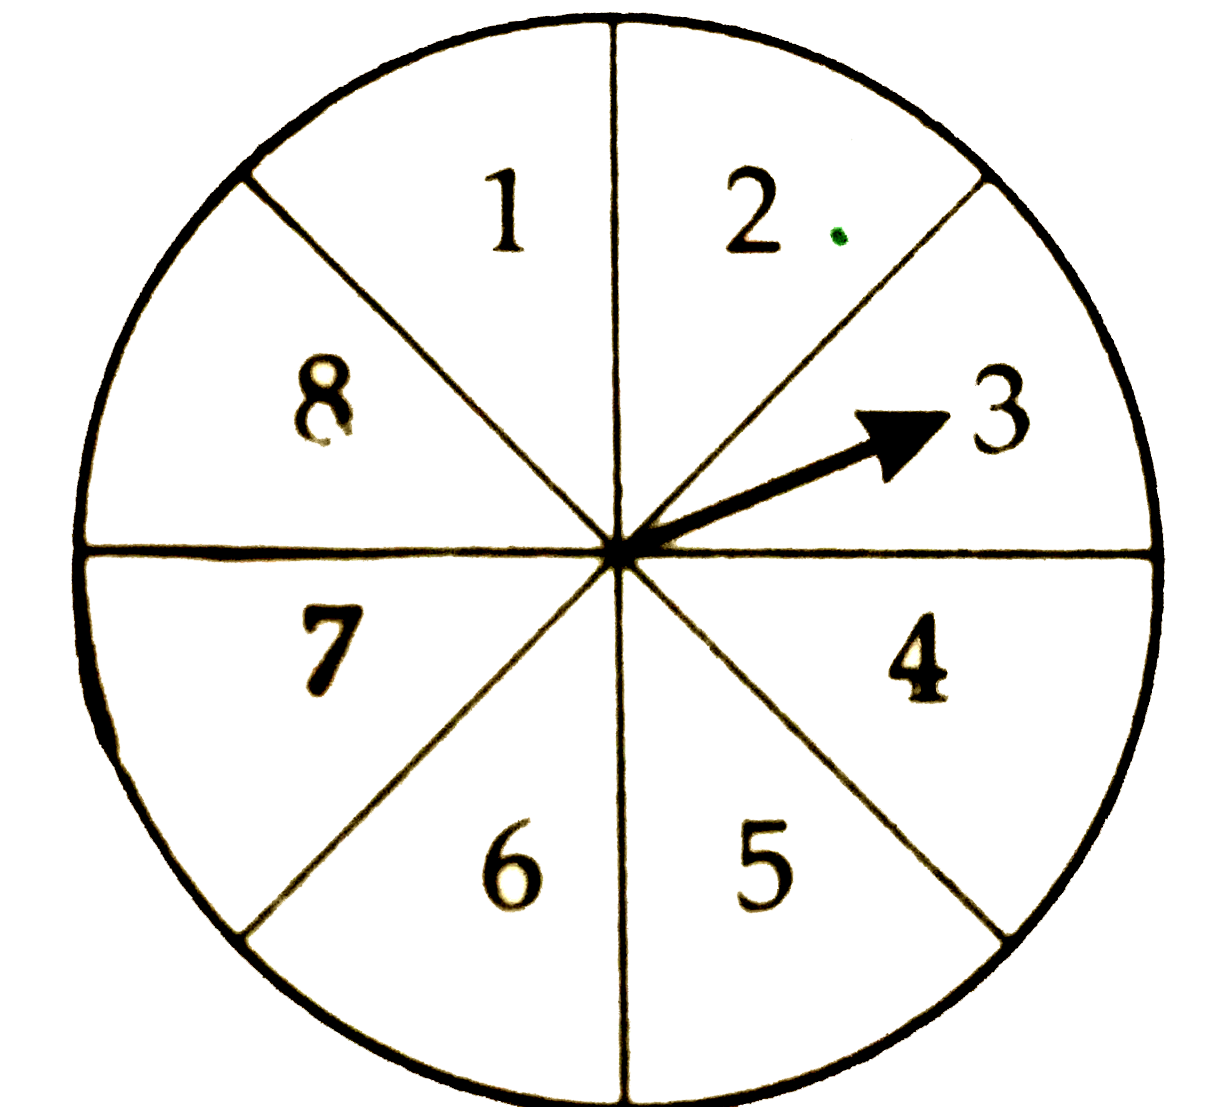 In a game of chance, a spinnig arrow comes to rest at one of the numbers 1,2,3,4,5,6,7,8. All these are equally likely outcomes. Find the probability that it wil rest at a number less than 9.